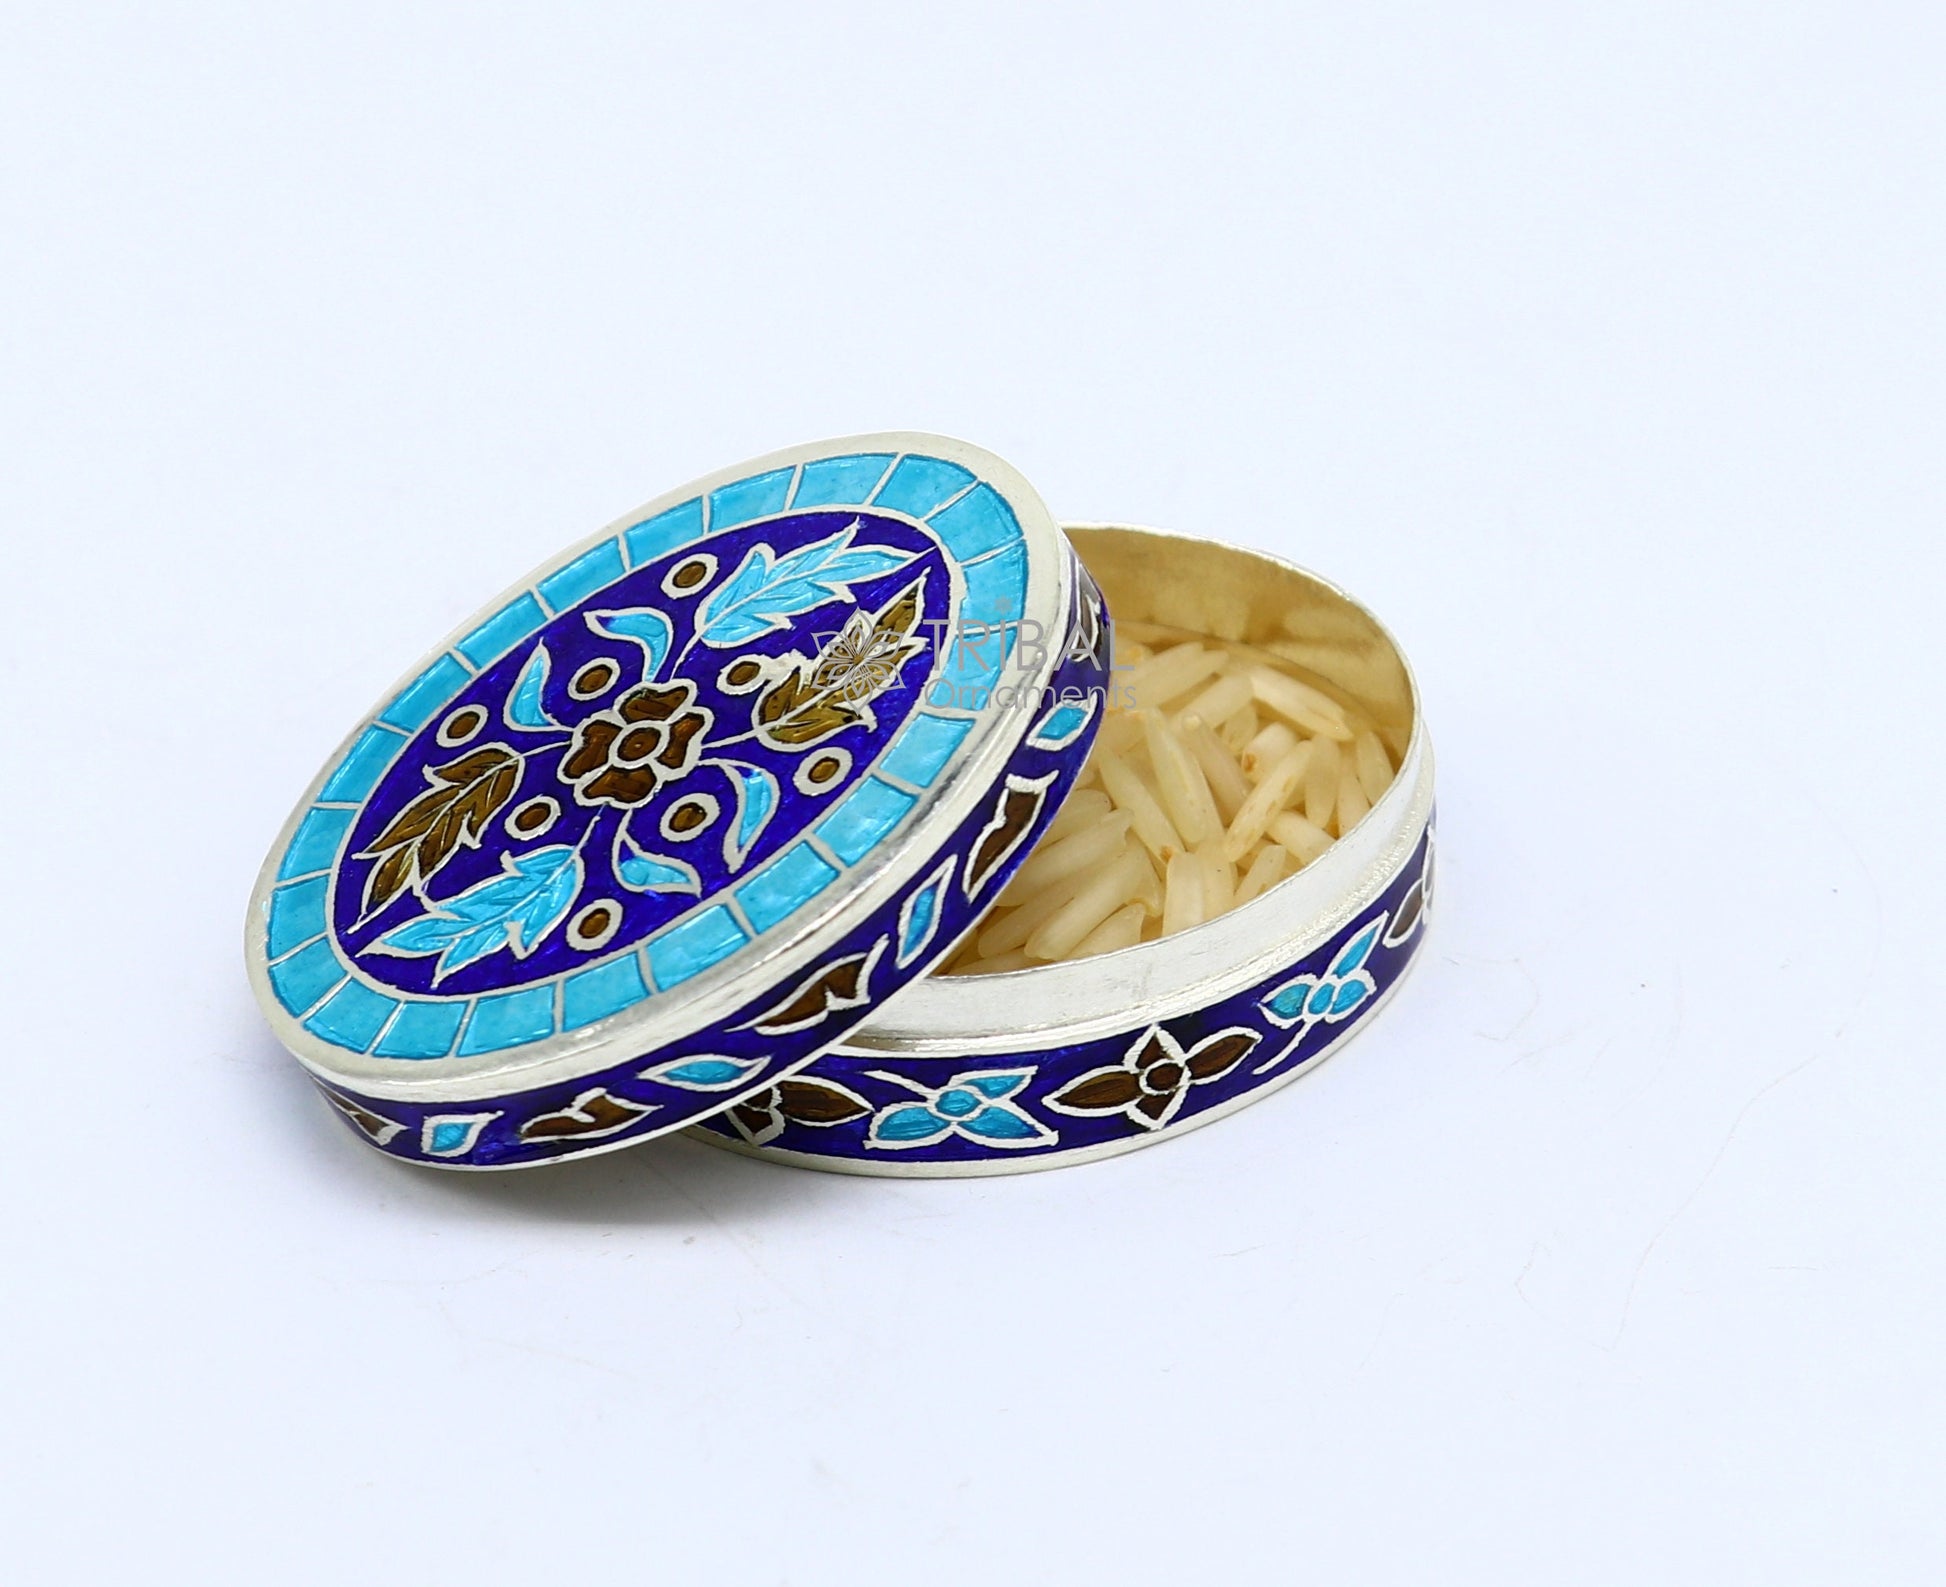 Trendy cultural style 925 sterling silver trinket box, casket box, container, Sindoor box vintage design enamel brides jewelry stb771 - TRIBAL ORNAMENTS